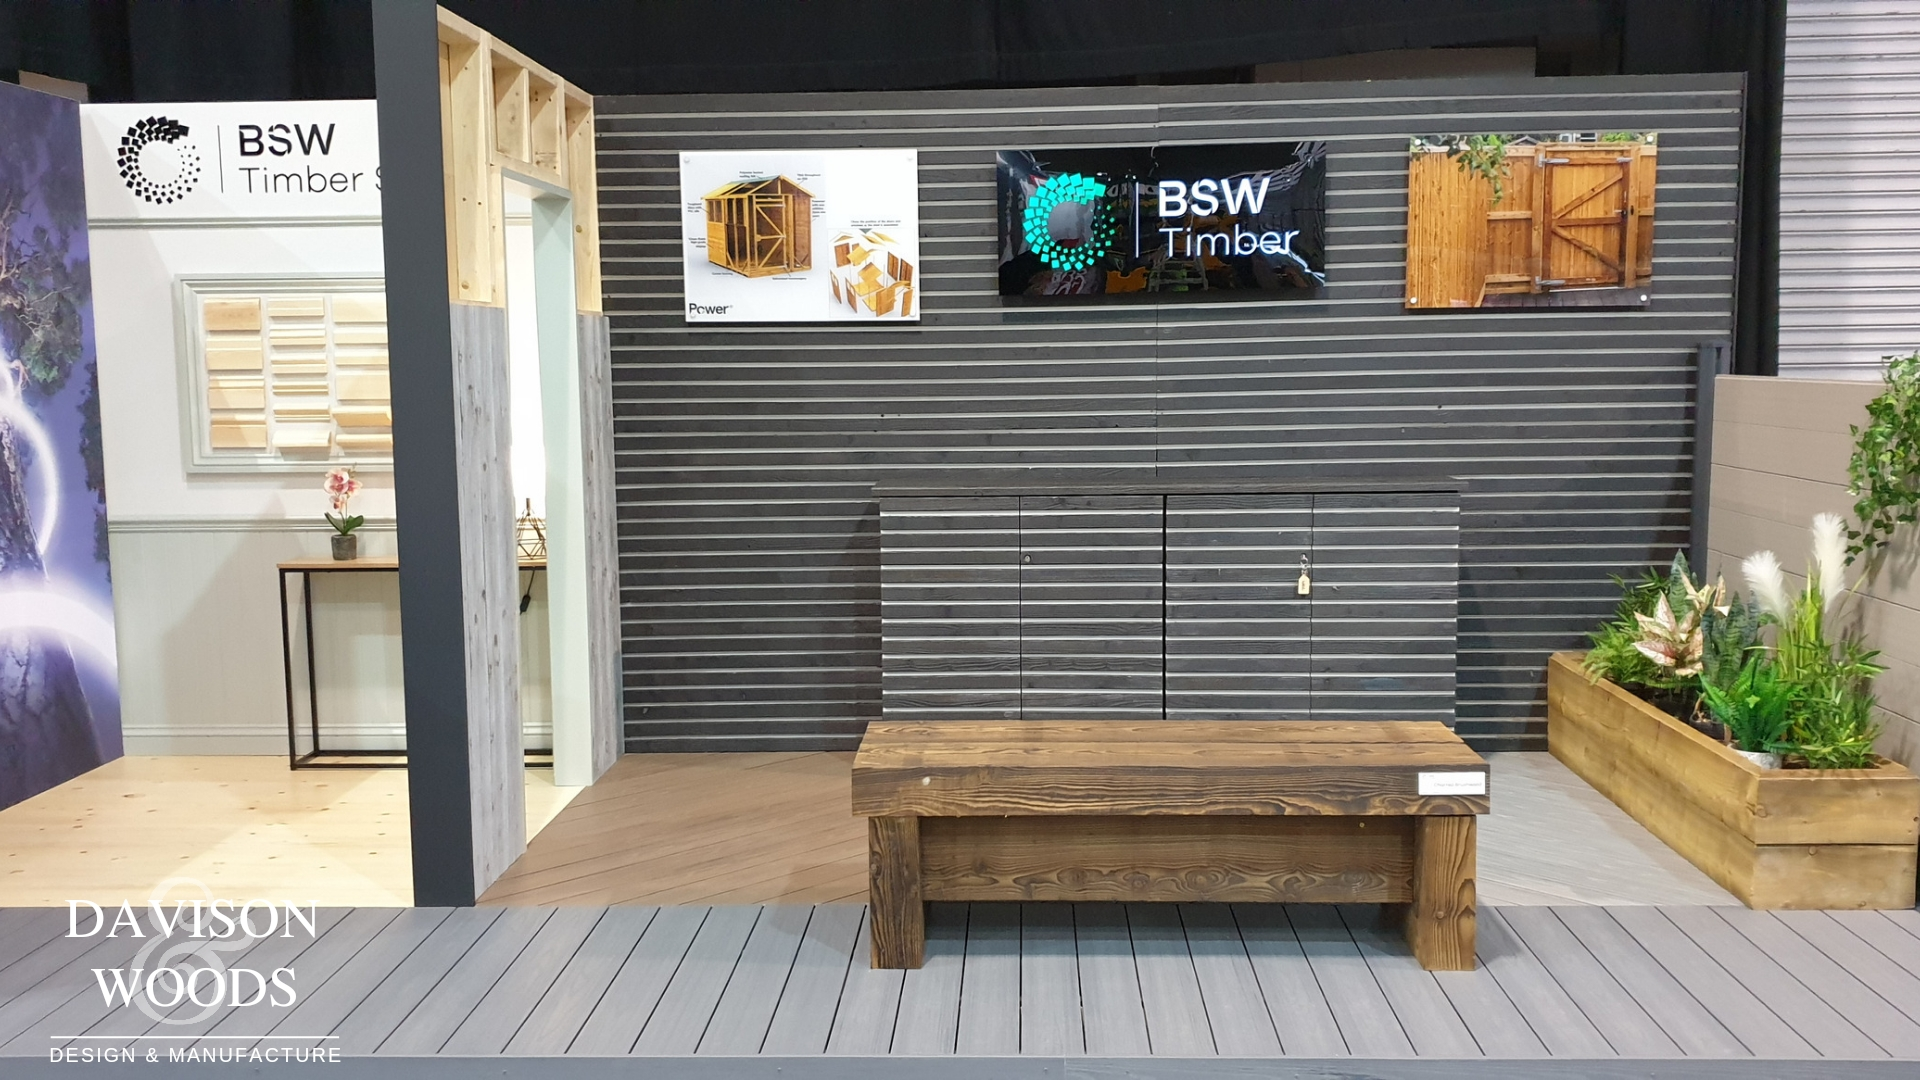 BSW exhibition stand featuring a BSW timber railway sleeper bench seat